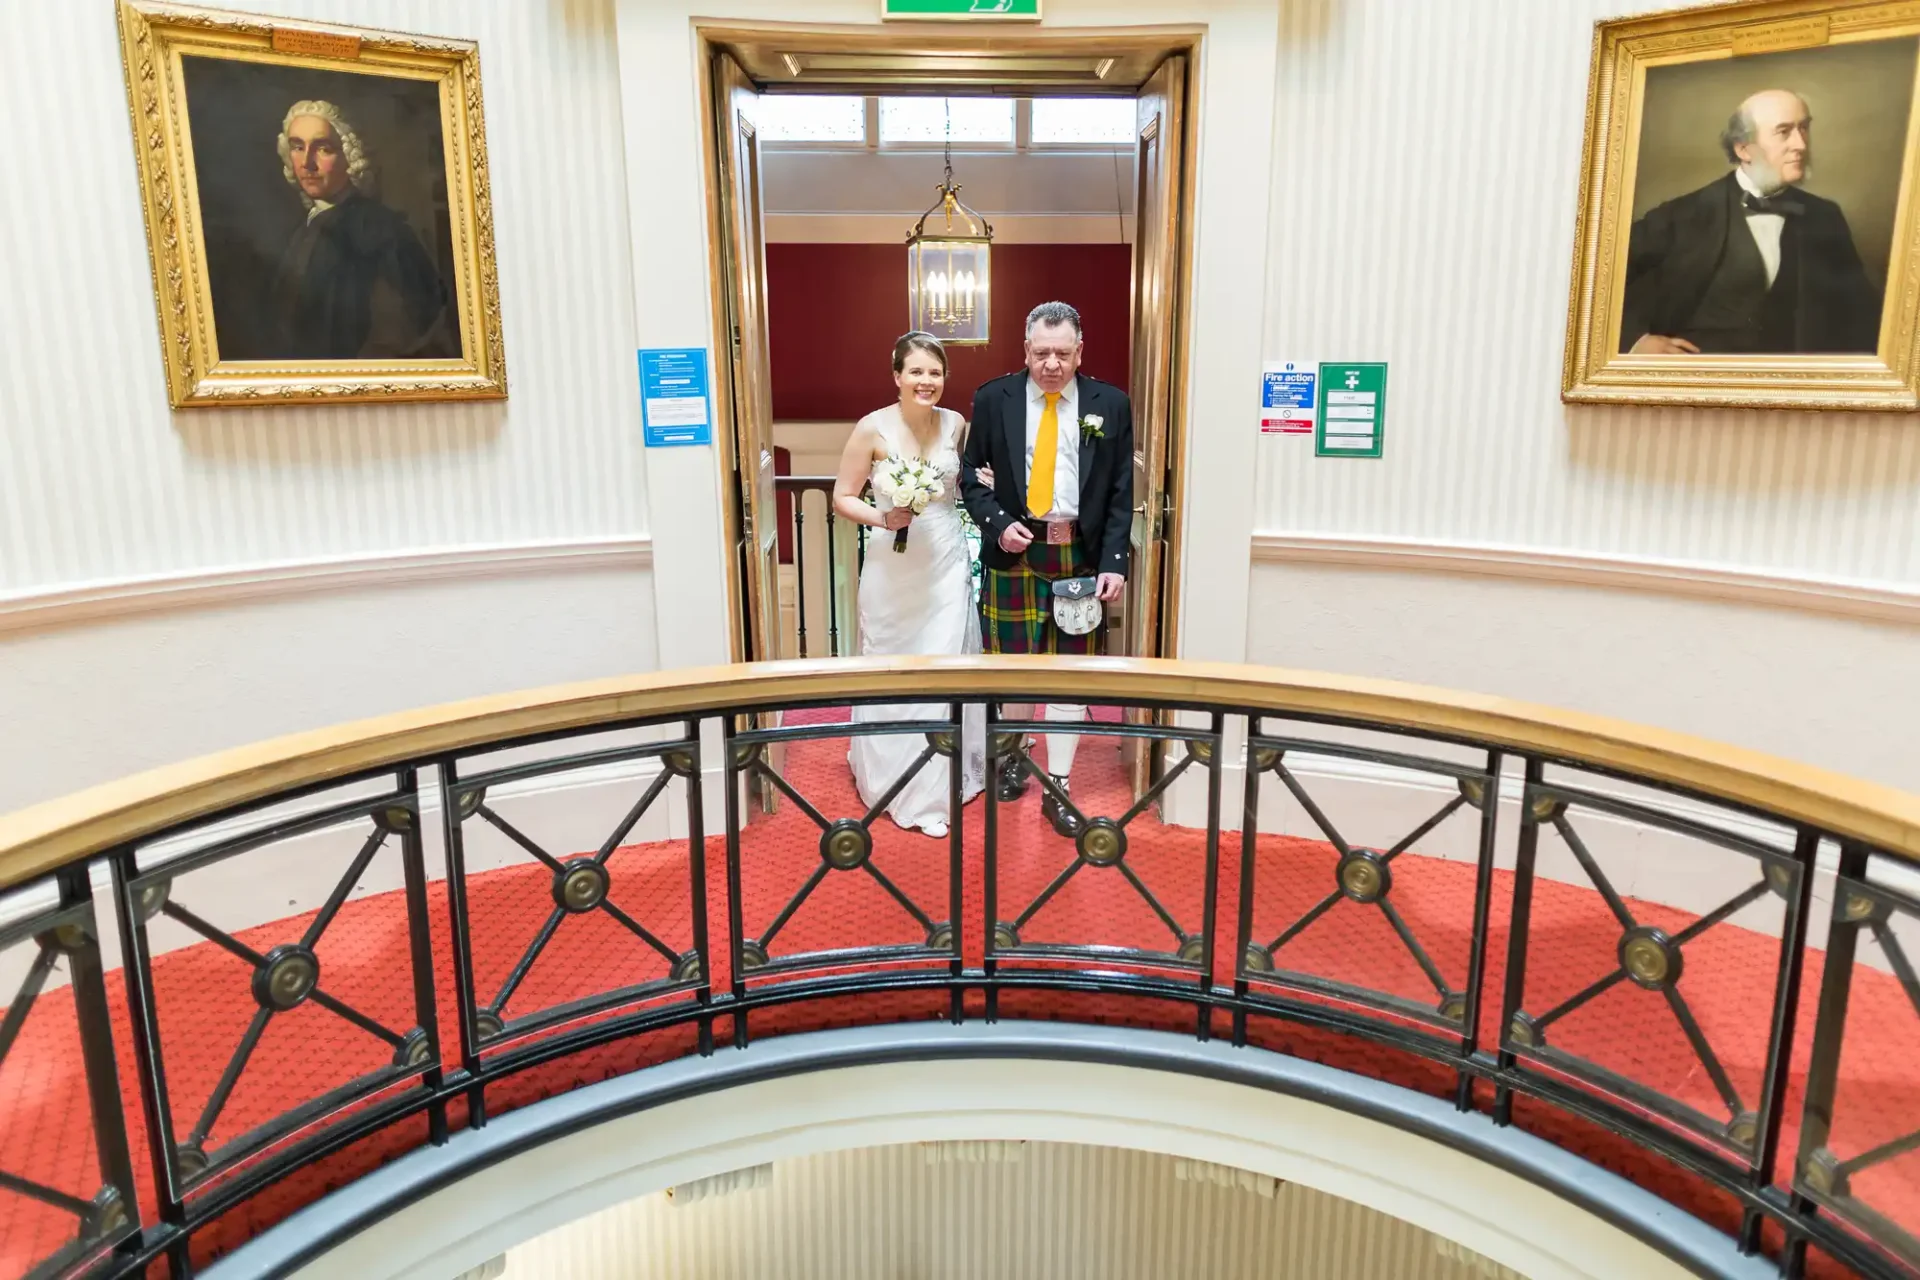 A bride and groom holding hands on a curved staircase in a hotel, with portraits hanging on the walls.